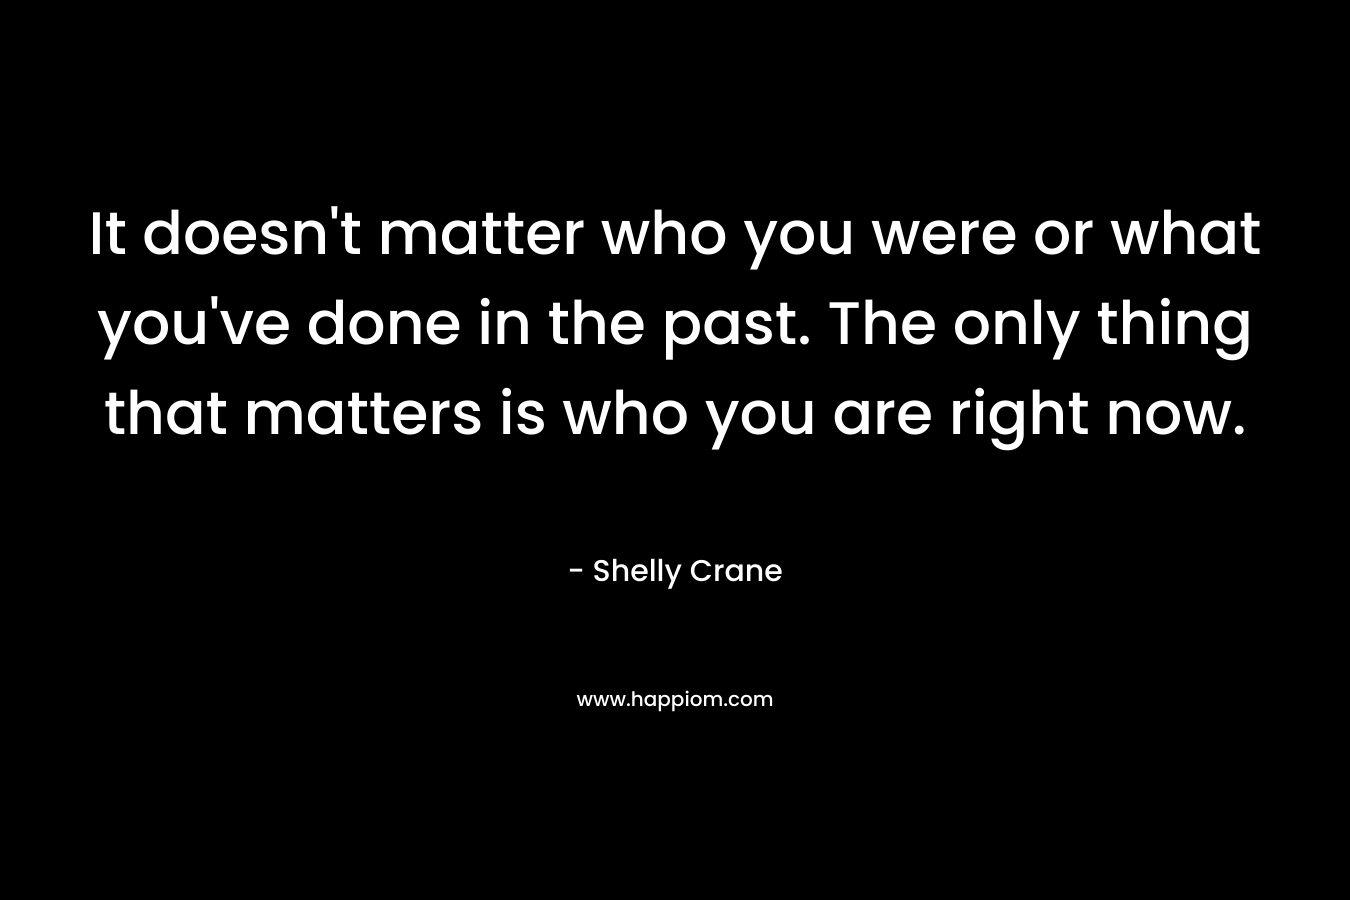 It doesn't matter who you were or what you've done in the past. The only thing that matters is who you are right now.